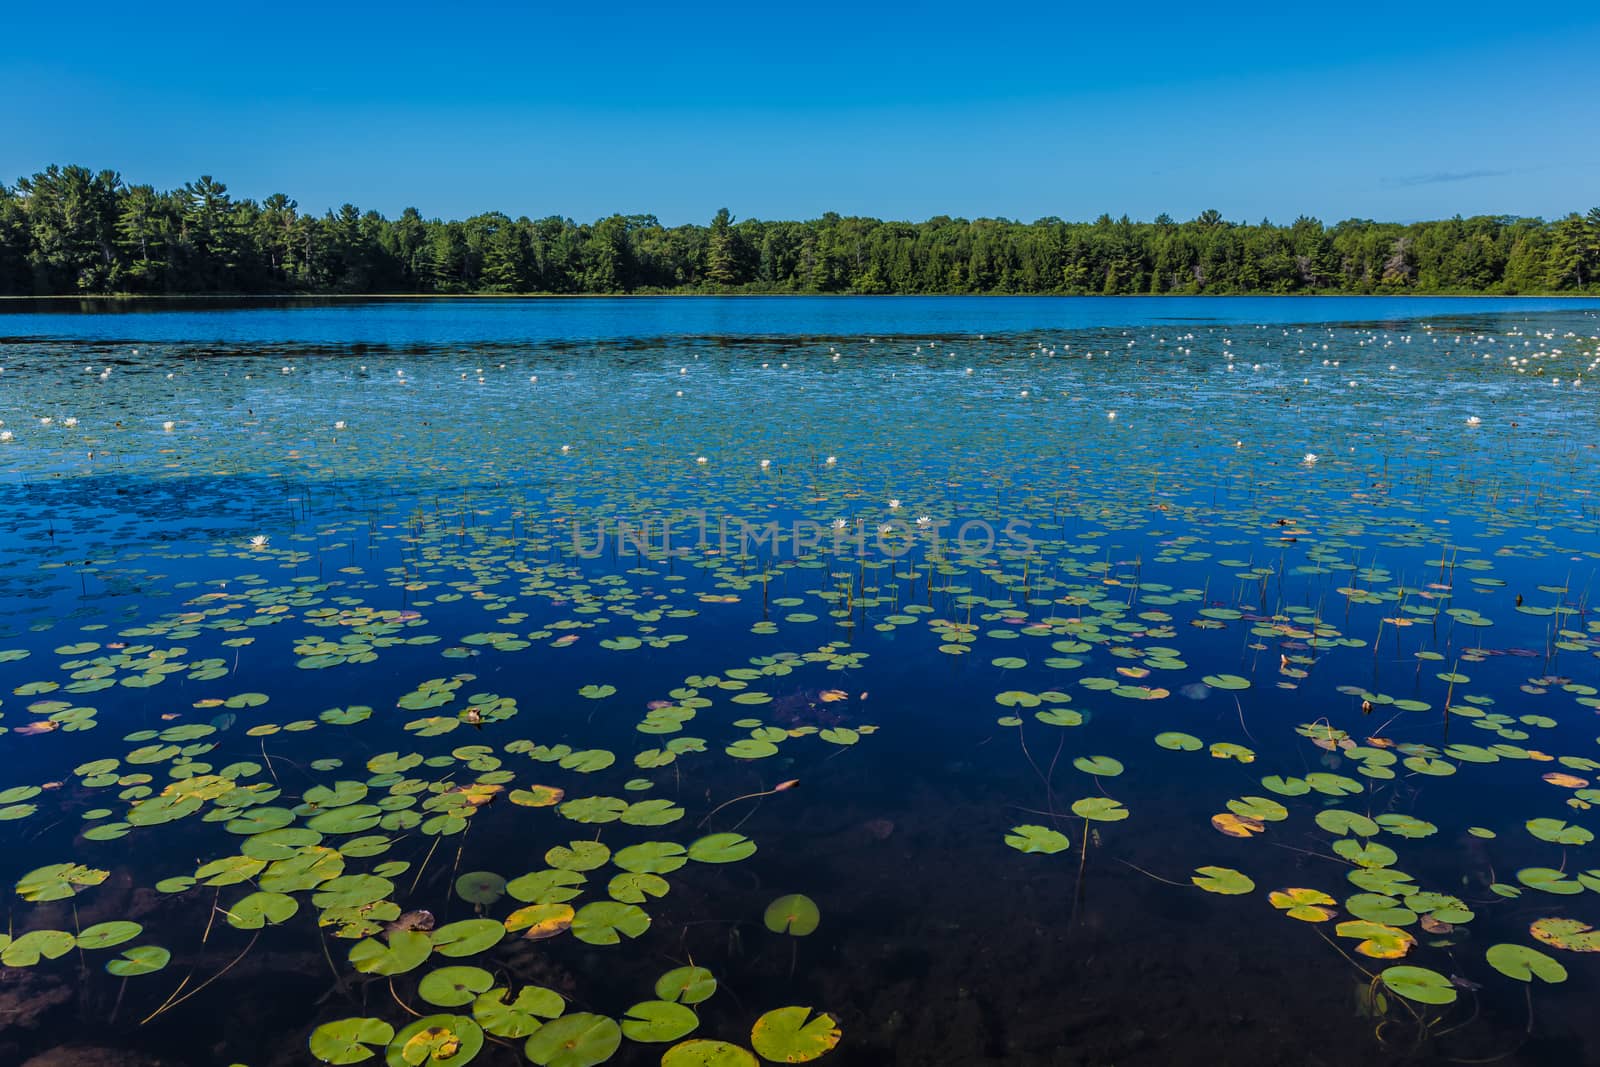 Many lily pads and lotus flowers floating on the water in a lake in the wild nature of Canada.